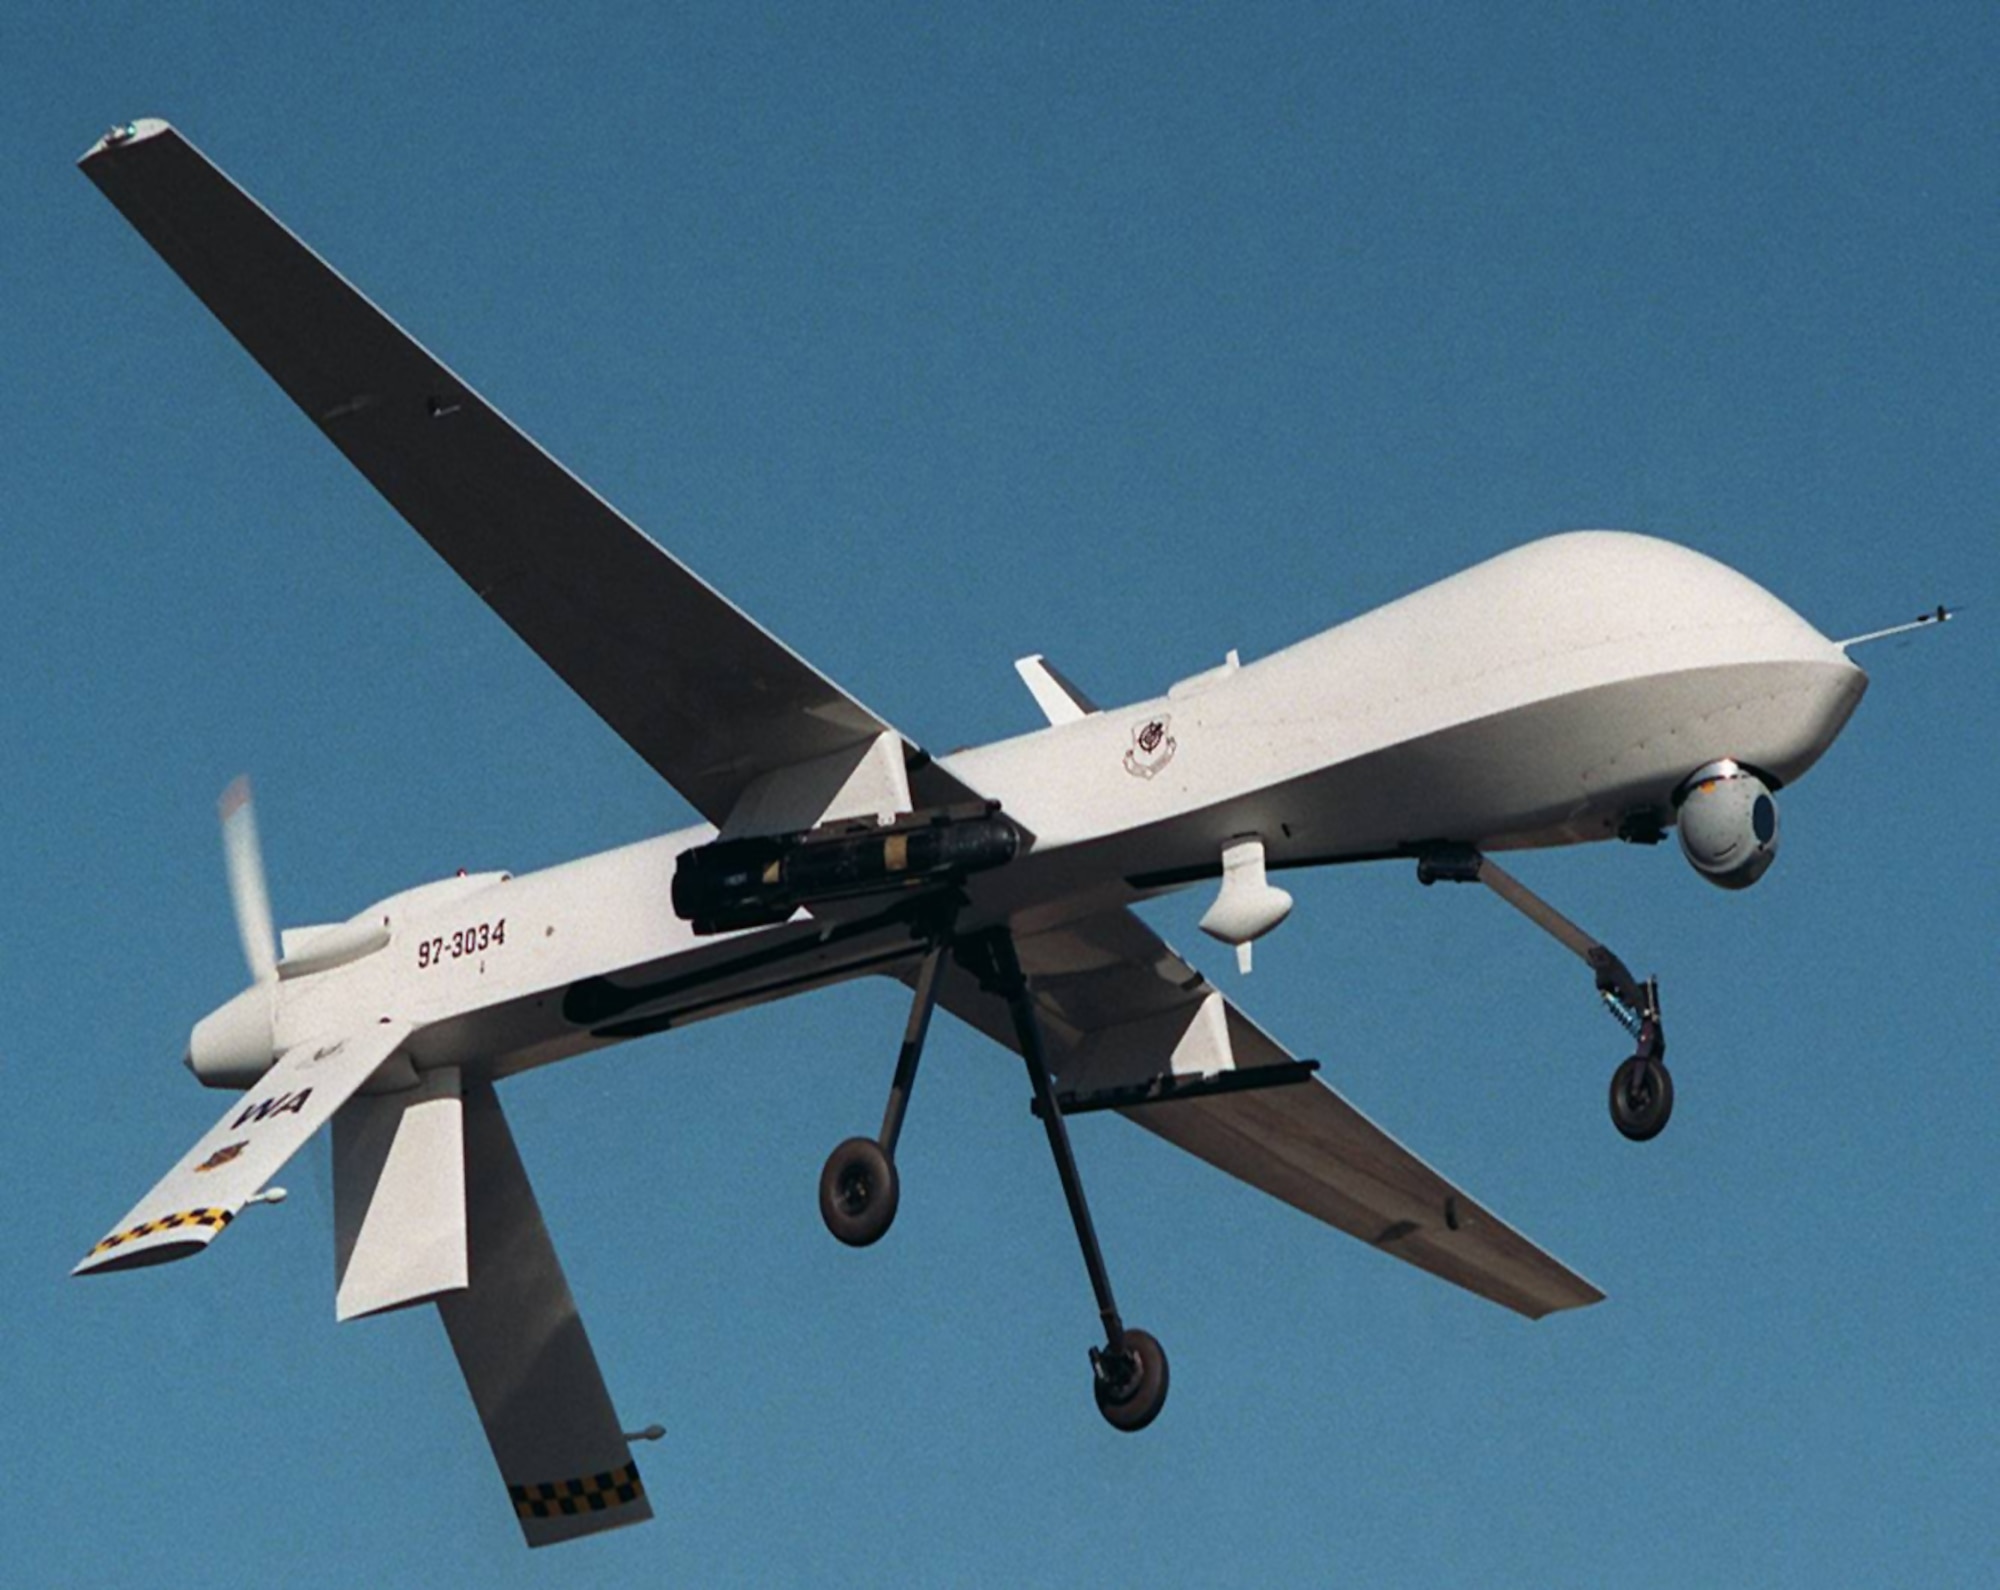 The MQ-1 Predator unmanned aerial vehicle is a medium-altitude, long-endurance, remotely piloted aircraft. The Predator's primary mission is interdiction and conducting armed reconnaissance against critical, perishable targets. When the Predator is not actively pursuing its primary mission, it acts as the joint forces air component commander-owned theater asset for reconnaissance, surveillance and target acquisition in support of the joint forces commander. (U.S. Air Force photo)